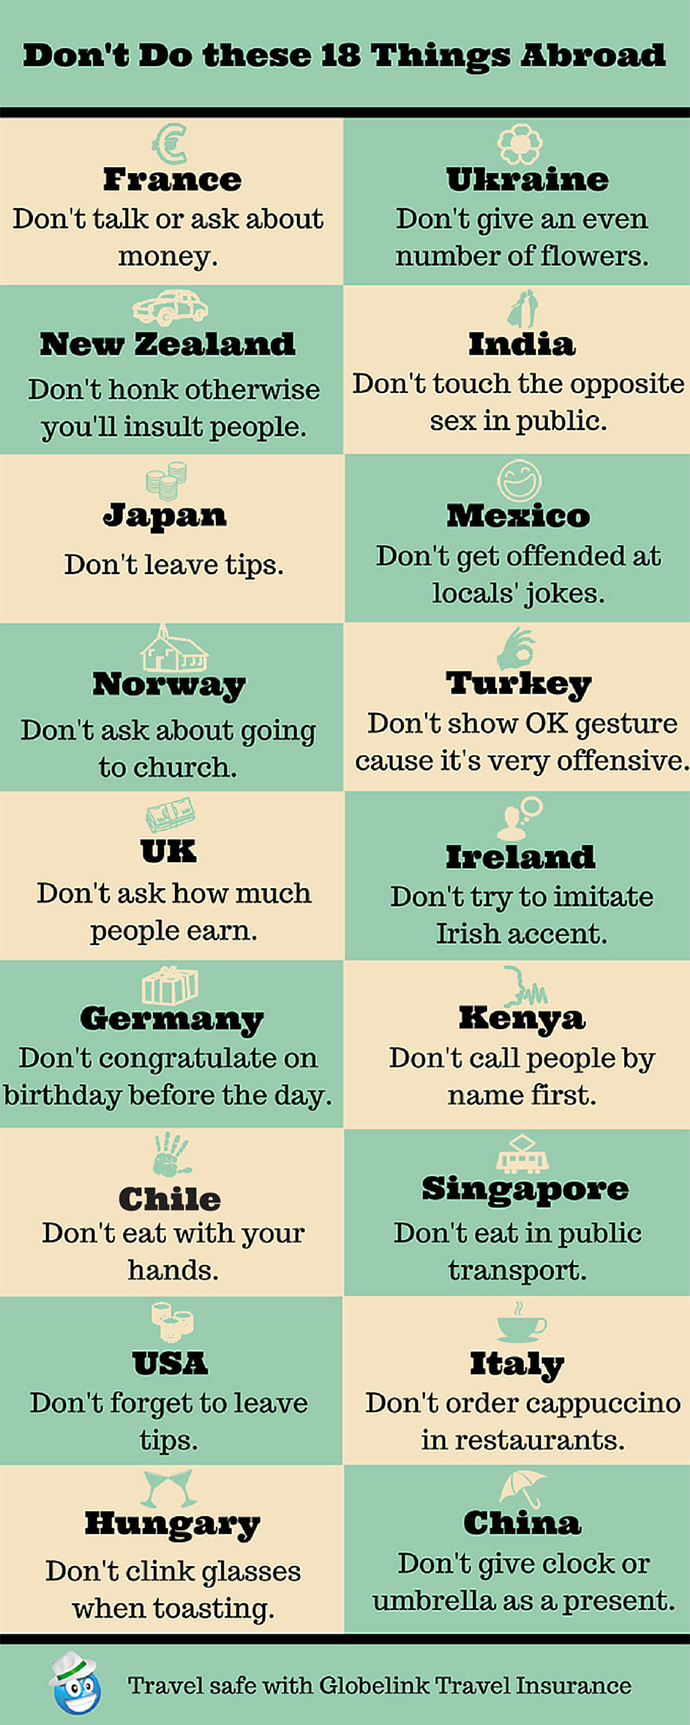 Don't Do these 18 Things Abroad